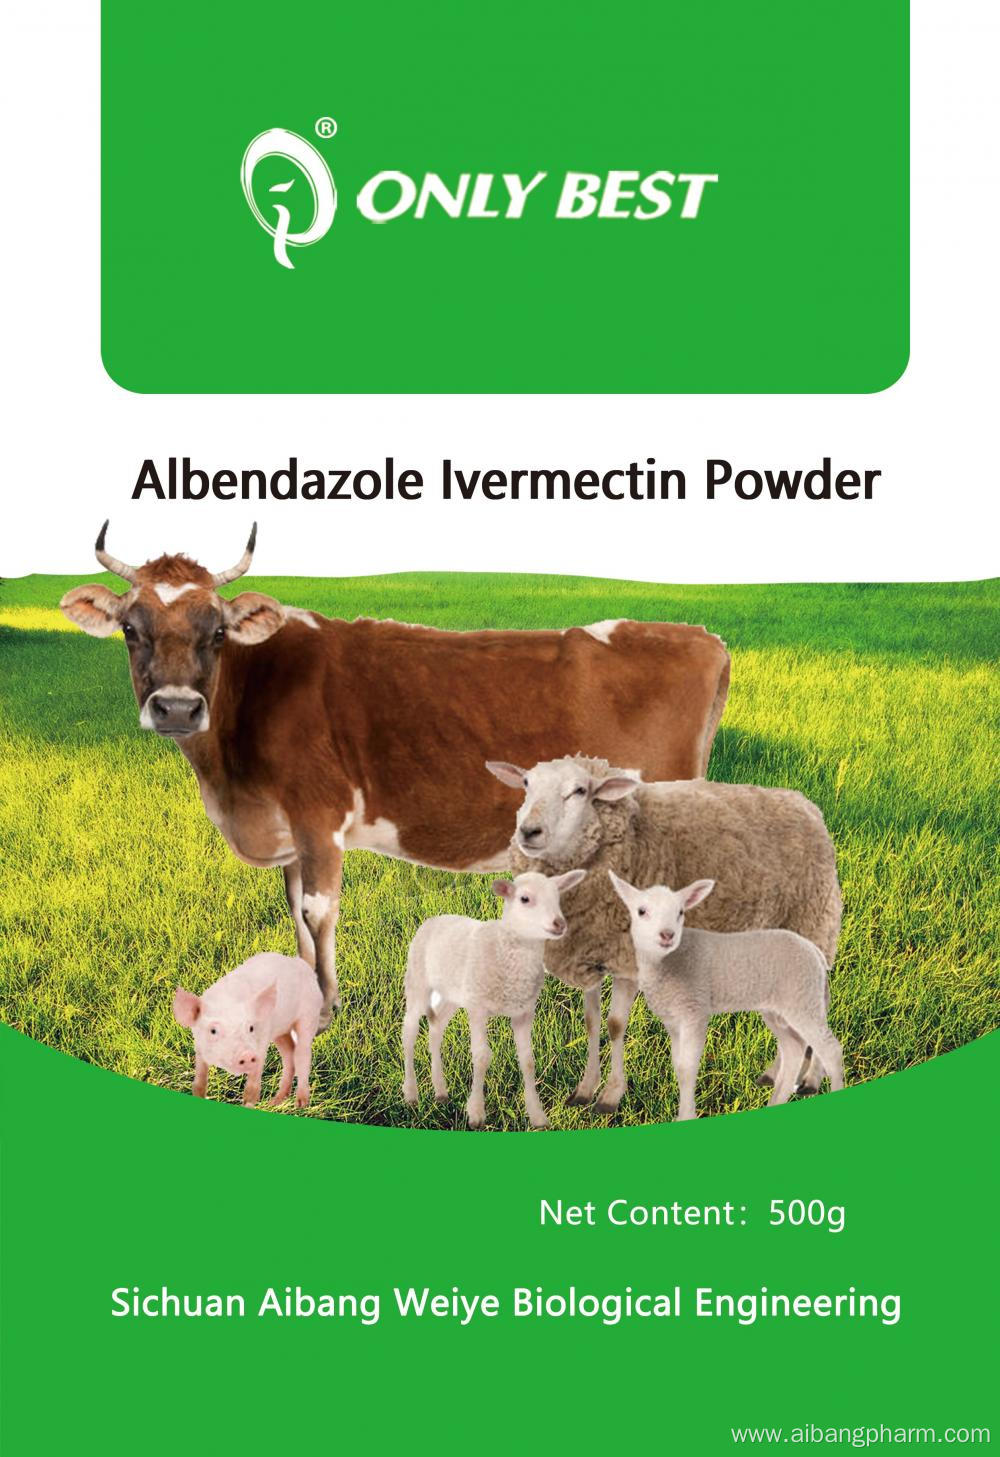 Veterinary anthelmintic Albendazole and Ivermectin Powder